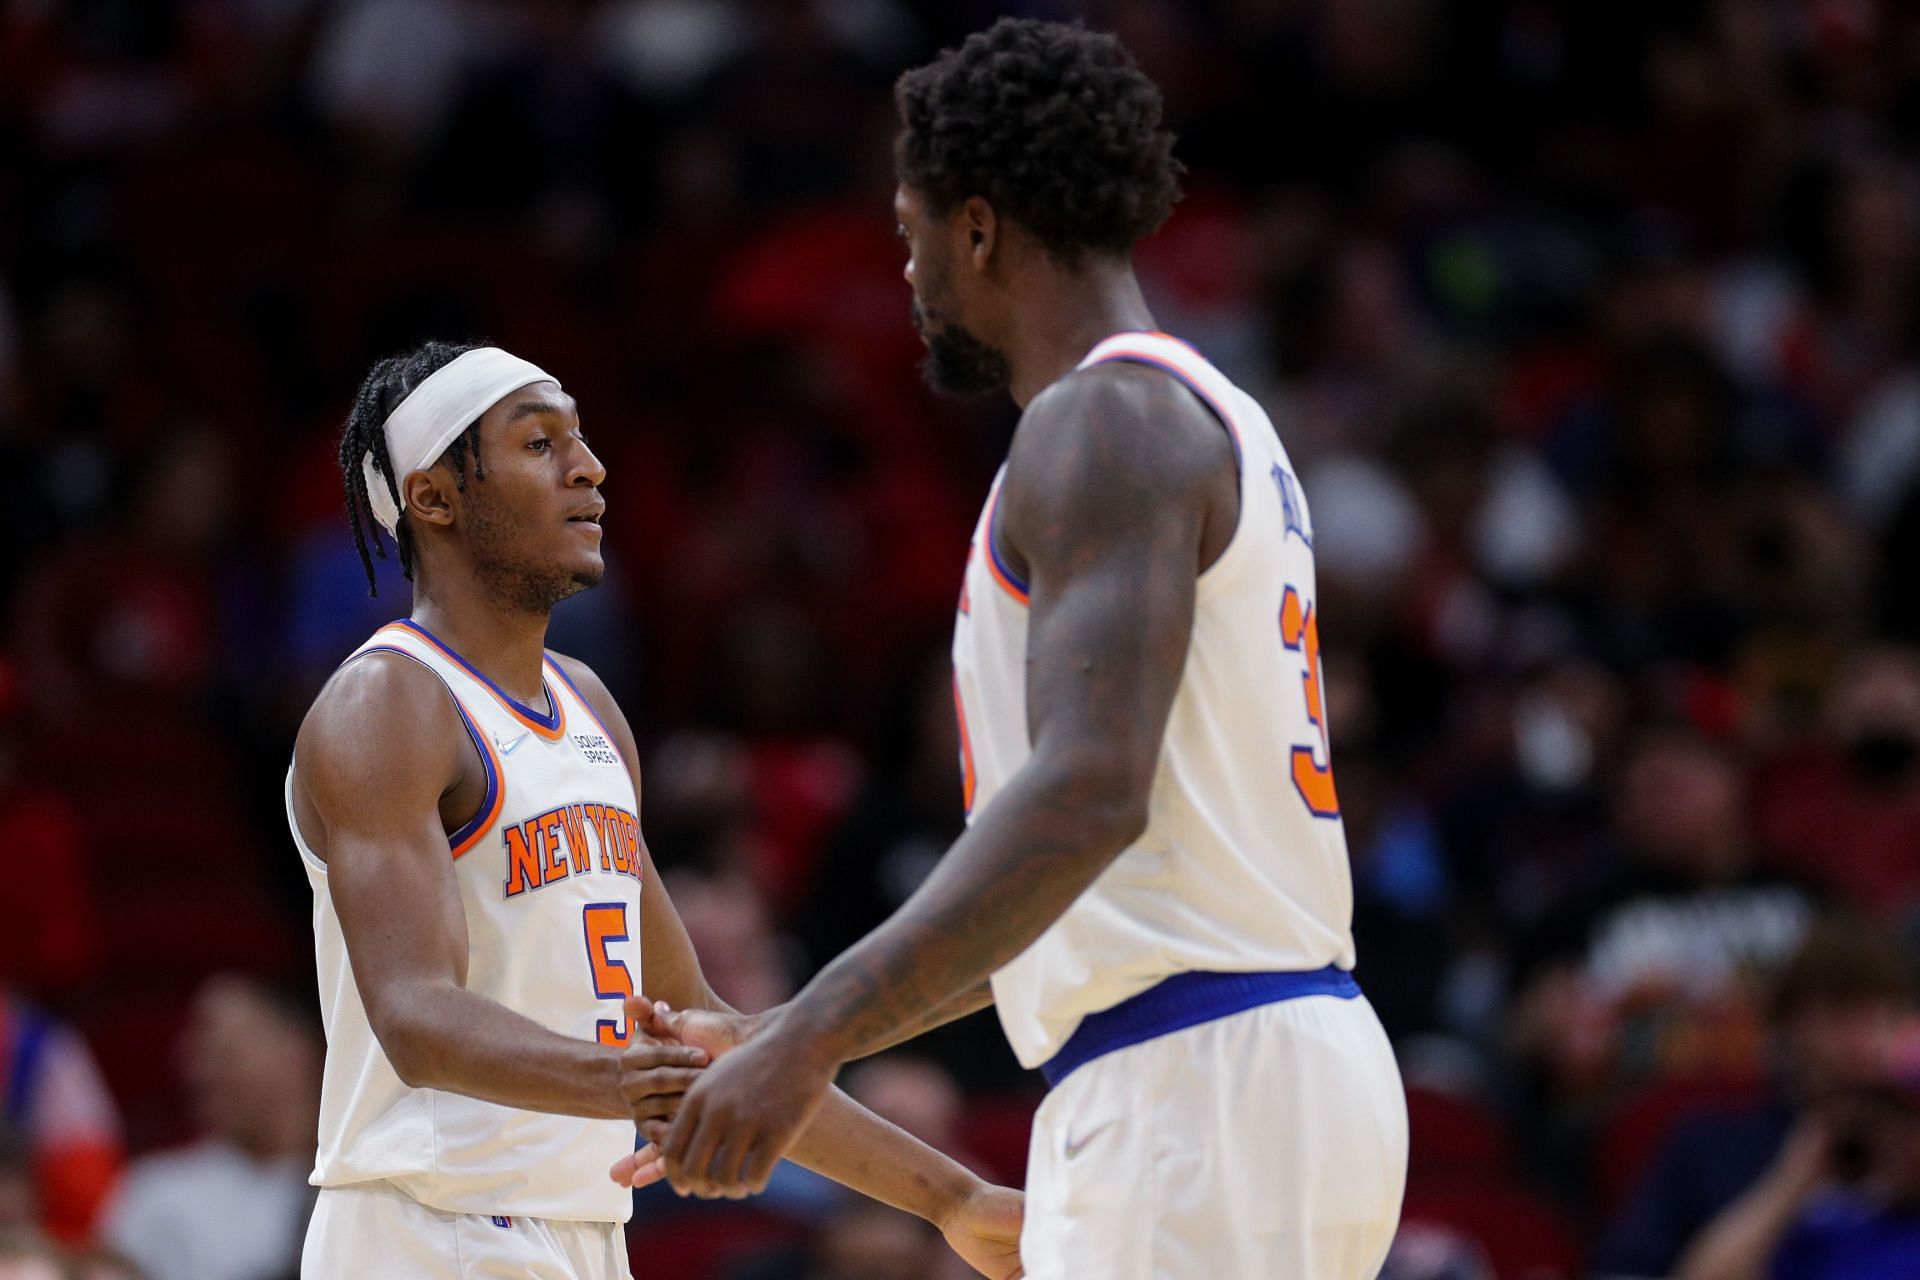 Julius Randle (right) of the New York Knicks with teammate Immanuel Quickley